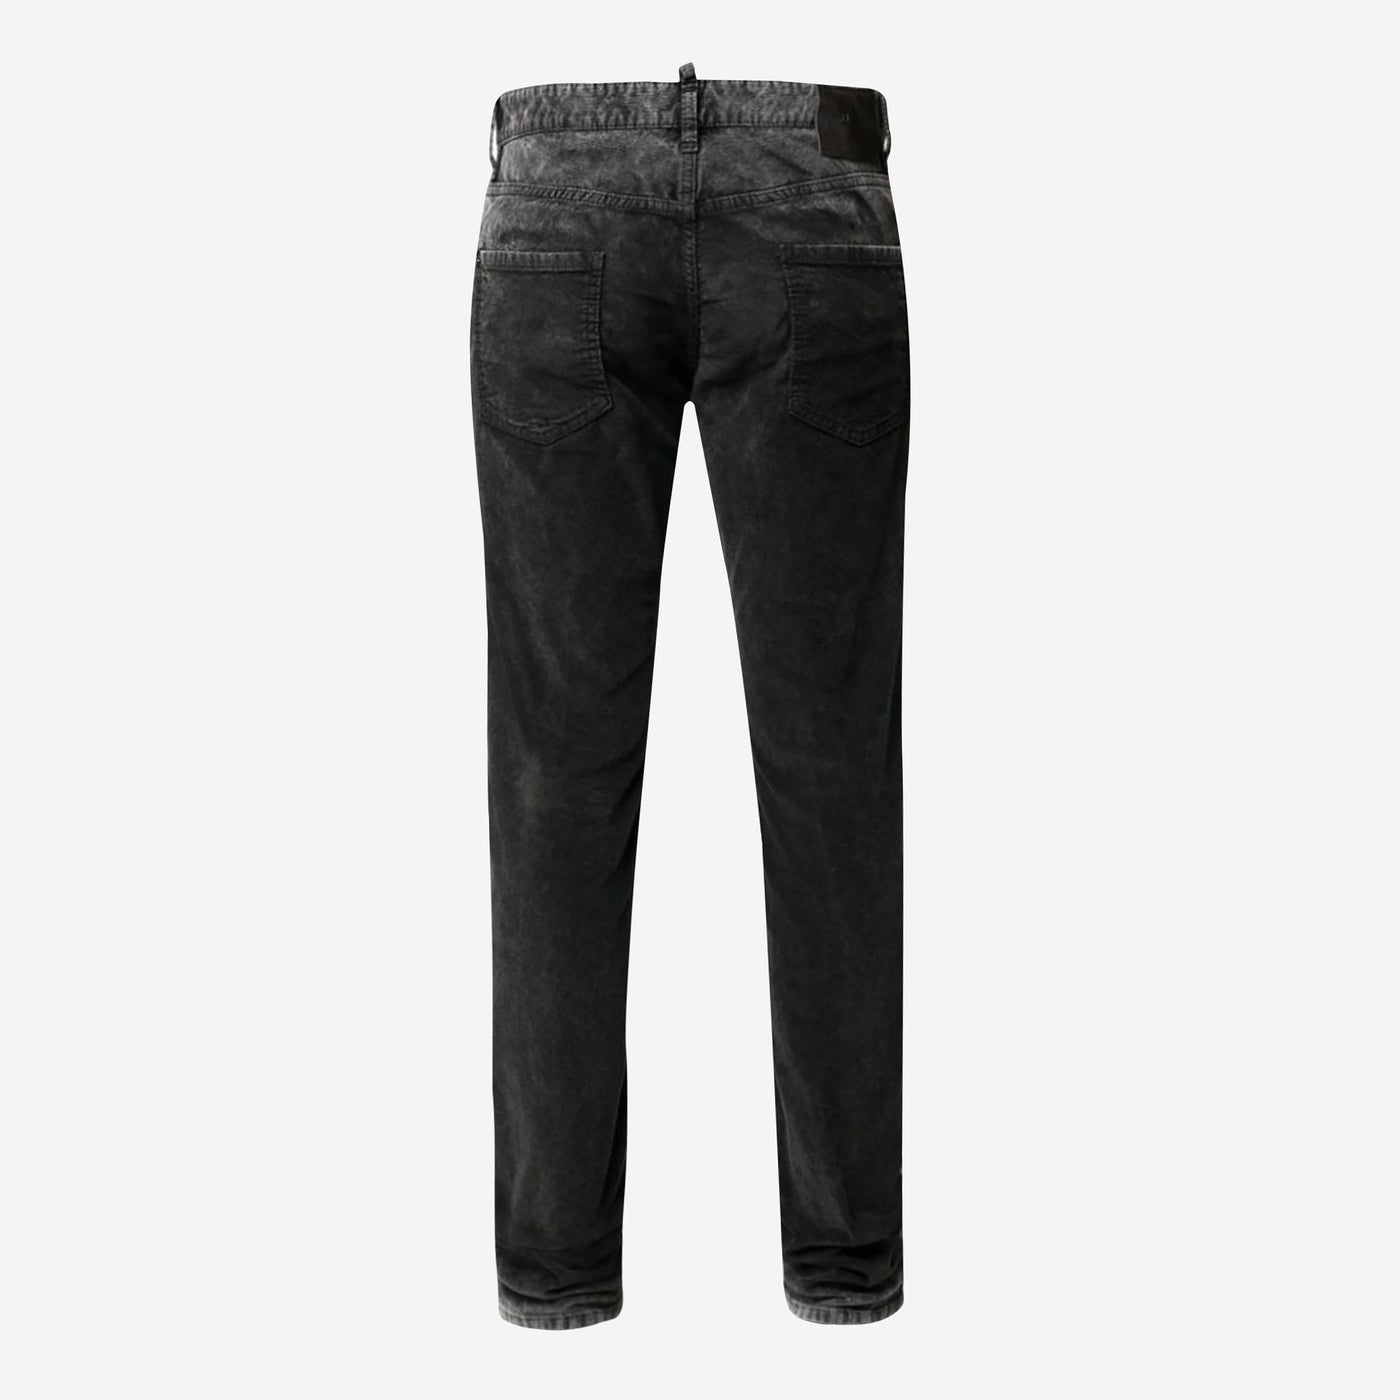 DSquared2 Marble Corduroy Wash Cool Guy Jeans